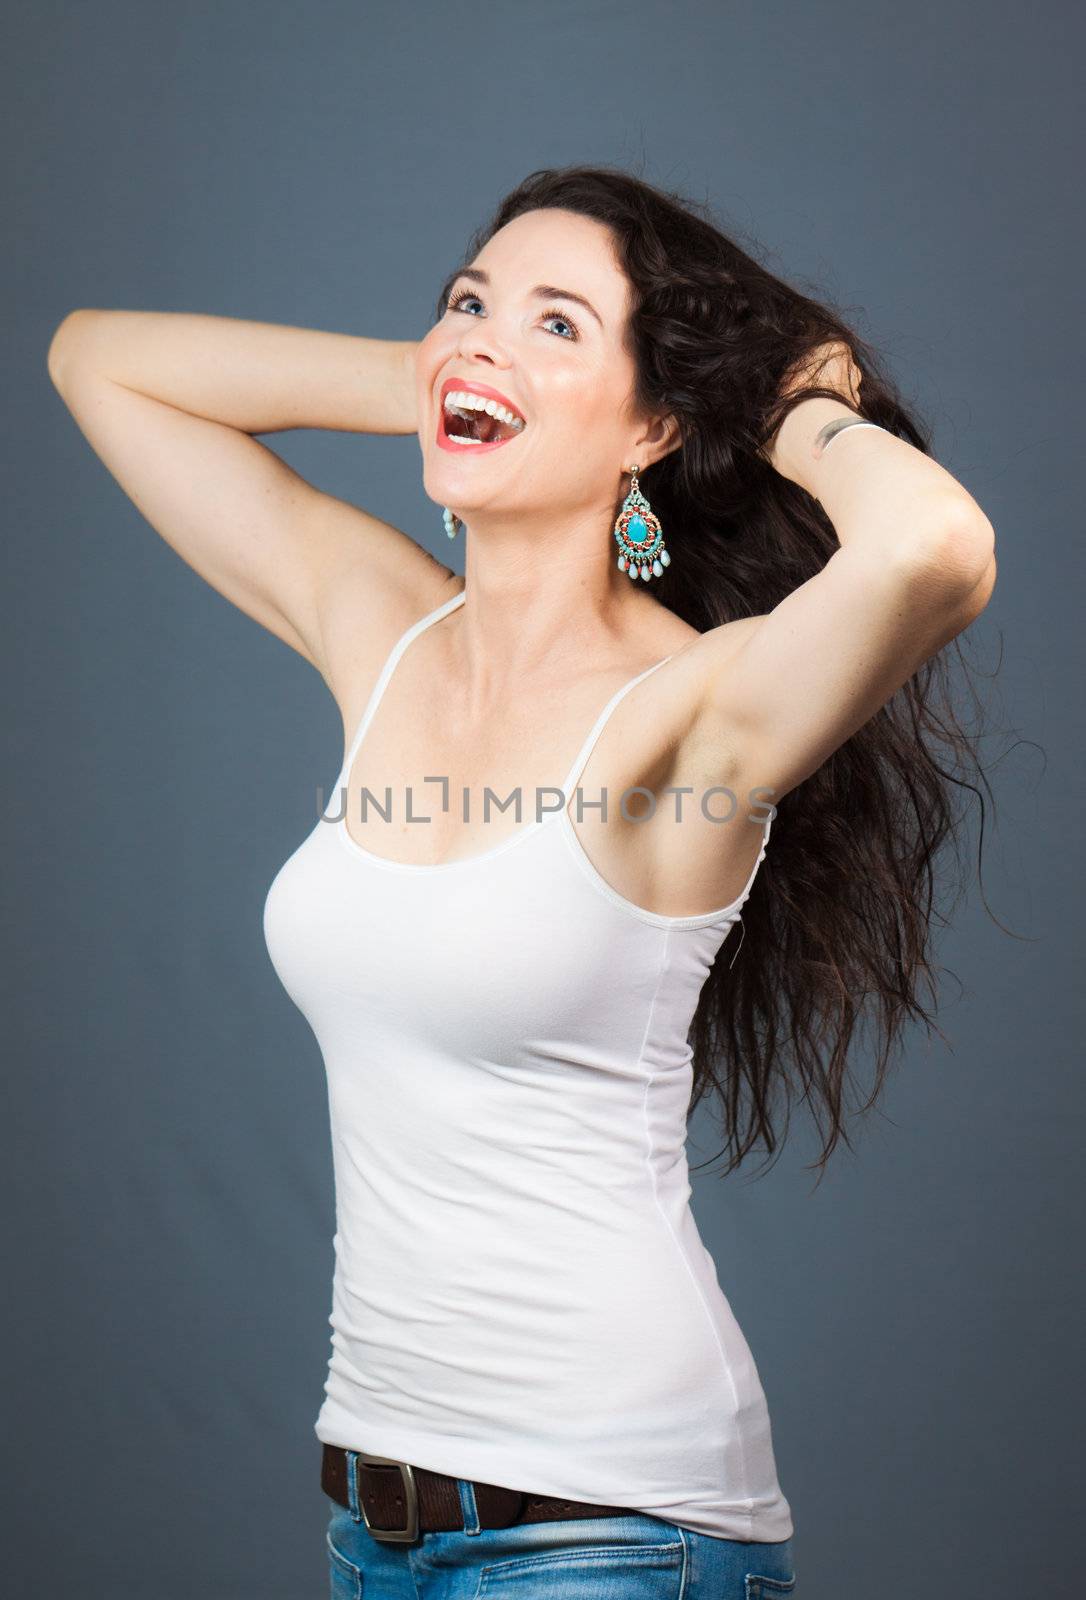 A beautiful young woman laughing and touching her hair